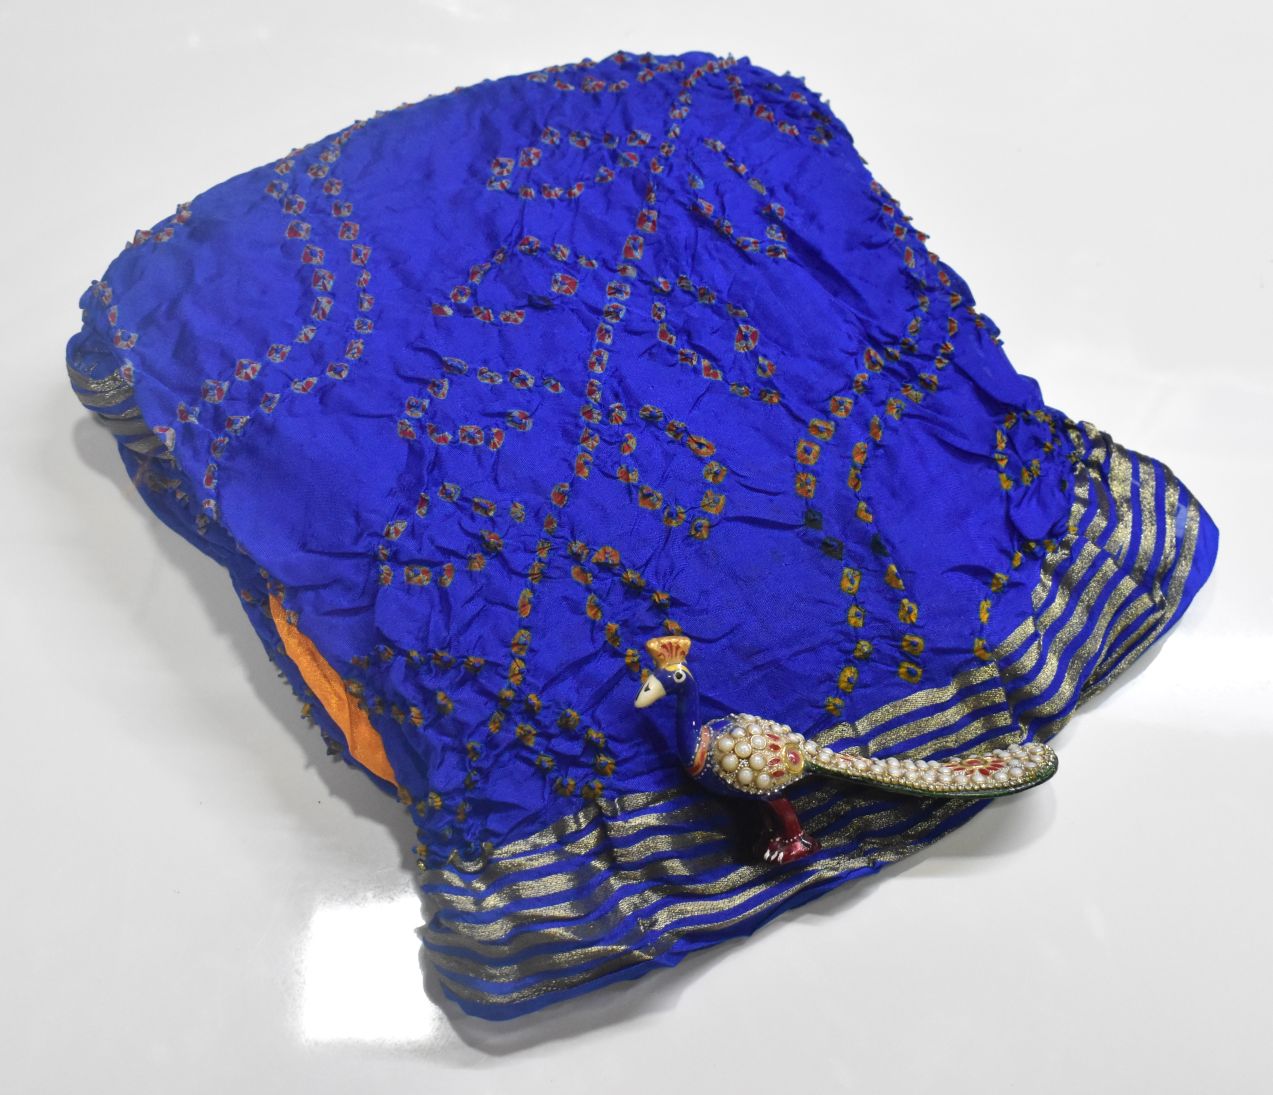 Jaipur Bandhani Saree in Solid blue color with zari border and Mustard Yellow blouse attached